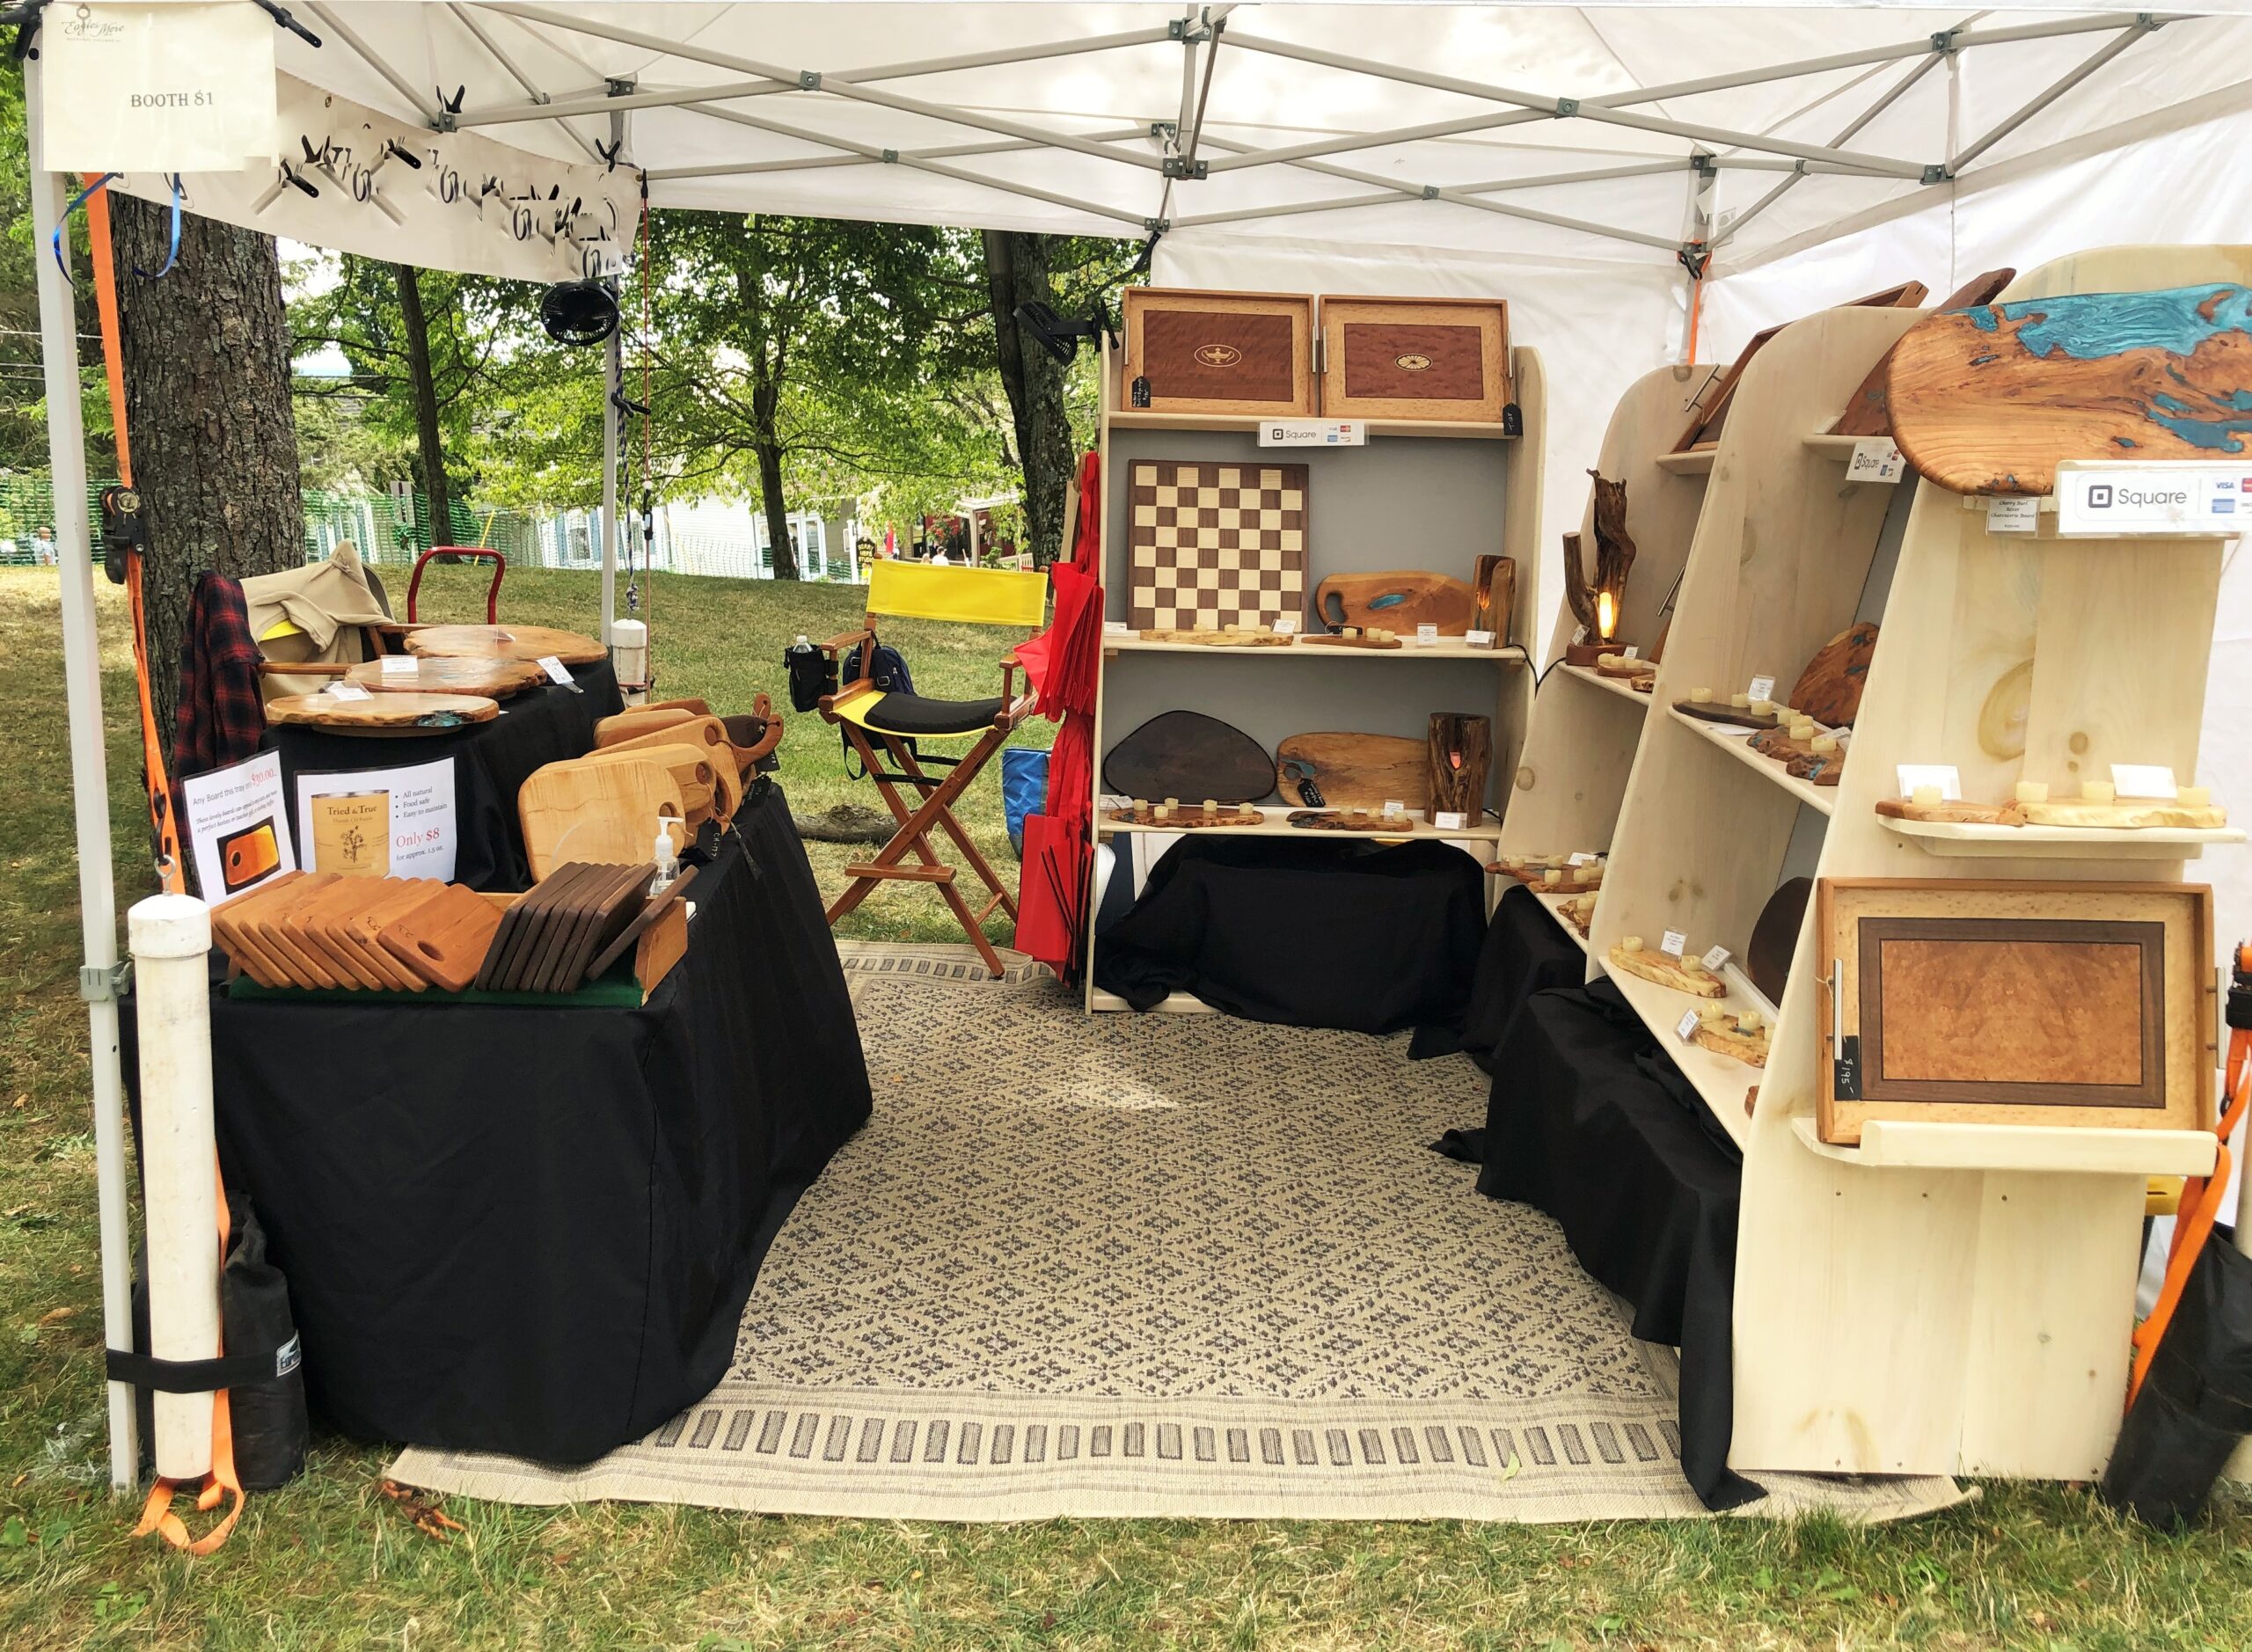 White Dog Woodworking booth